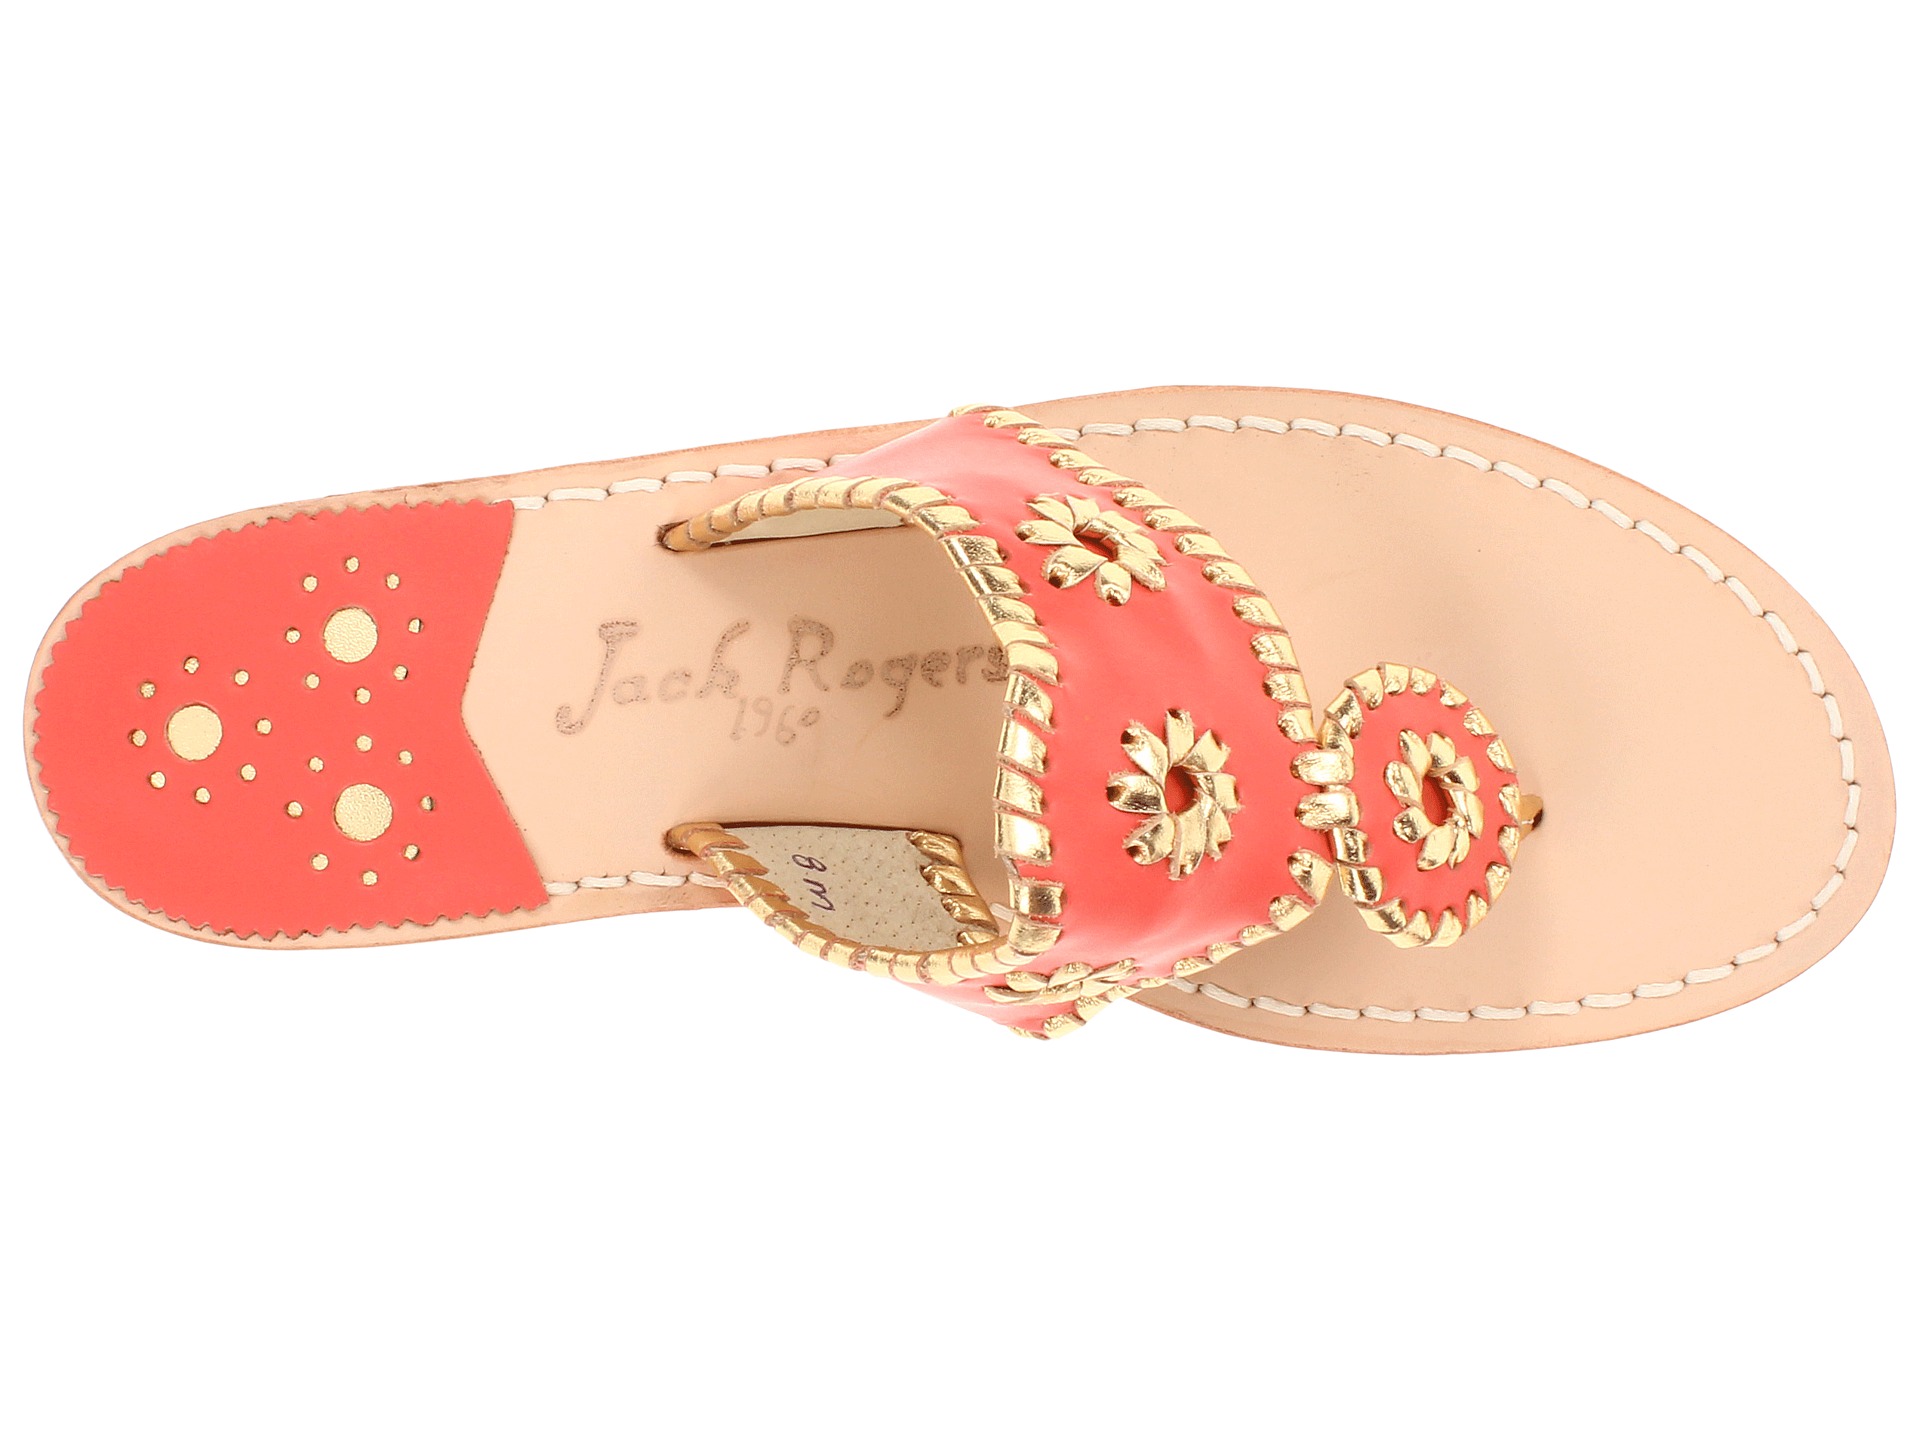 Jack Rogers Nantucket Gold Fire Coral/Gold - Zappos.com Free Shipping ...